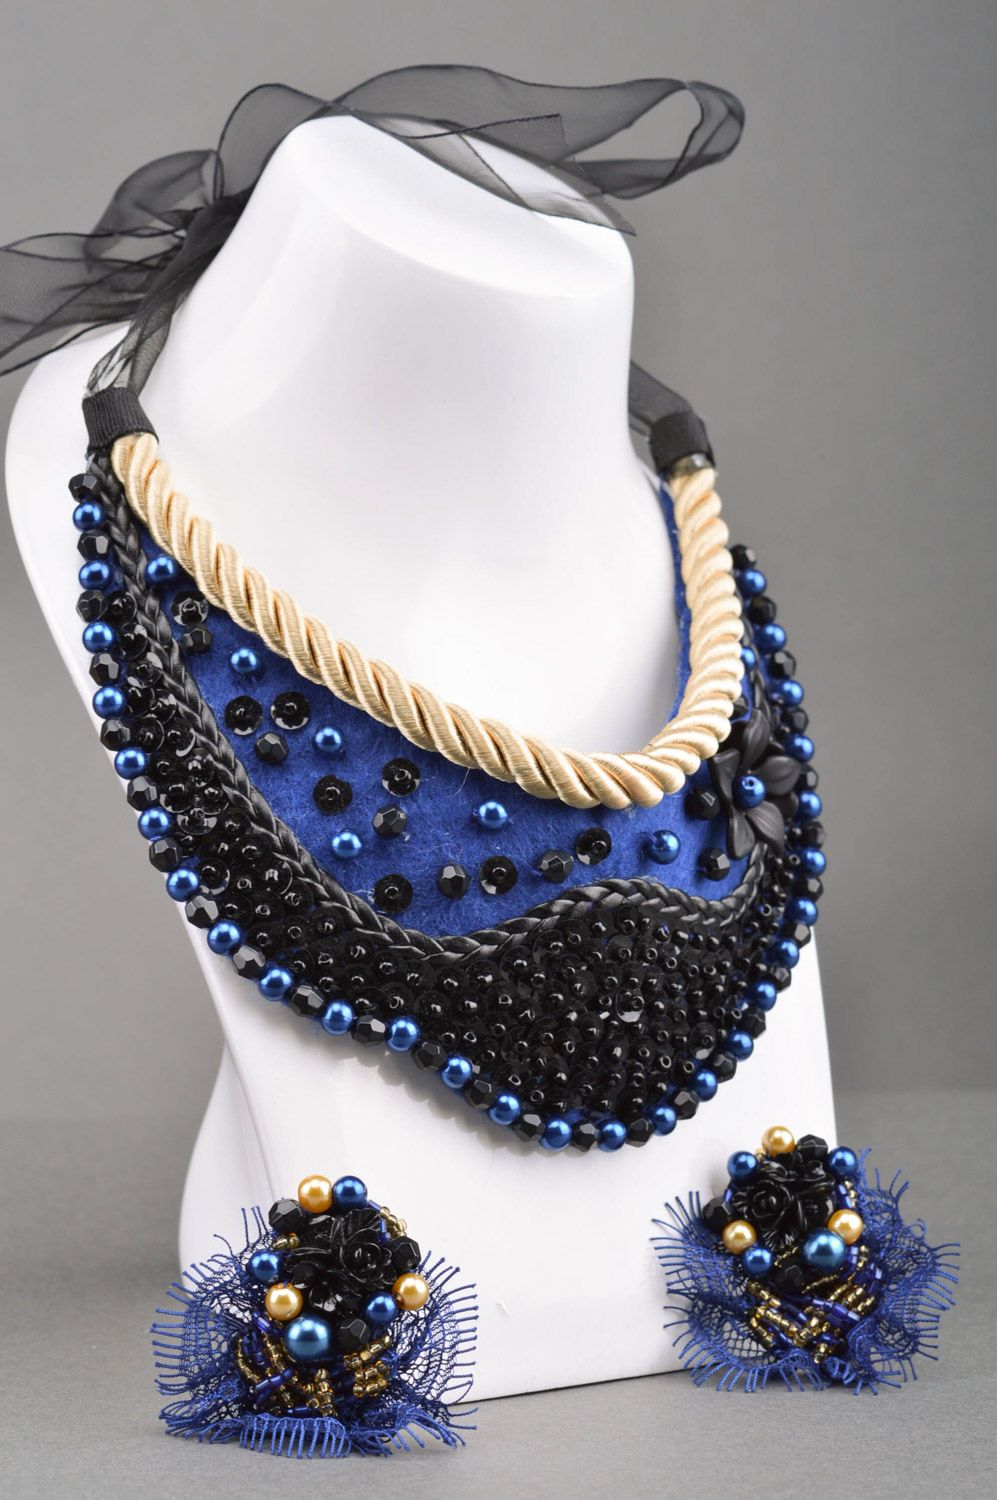 Set of handmade bead embroidered jewelry earrings and necklace blue and black photo 3